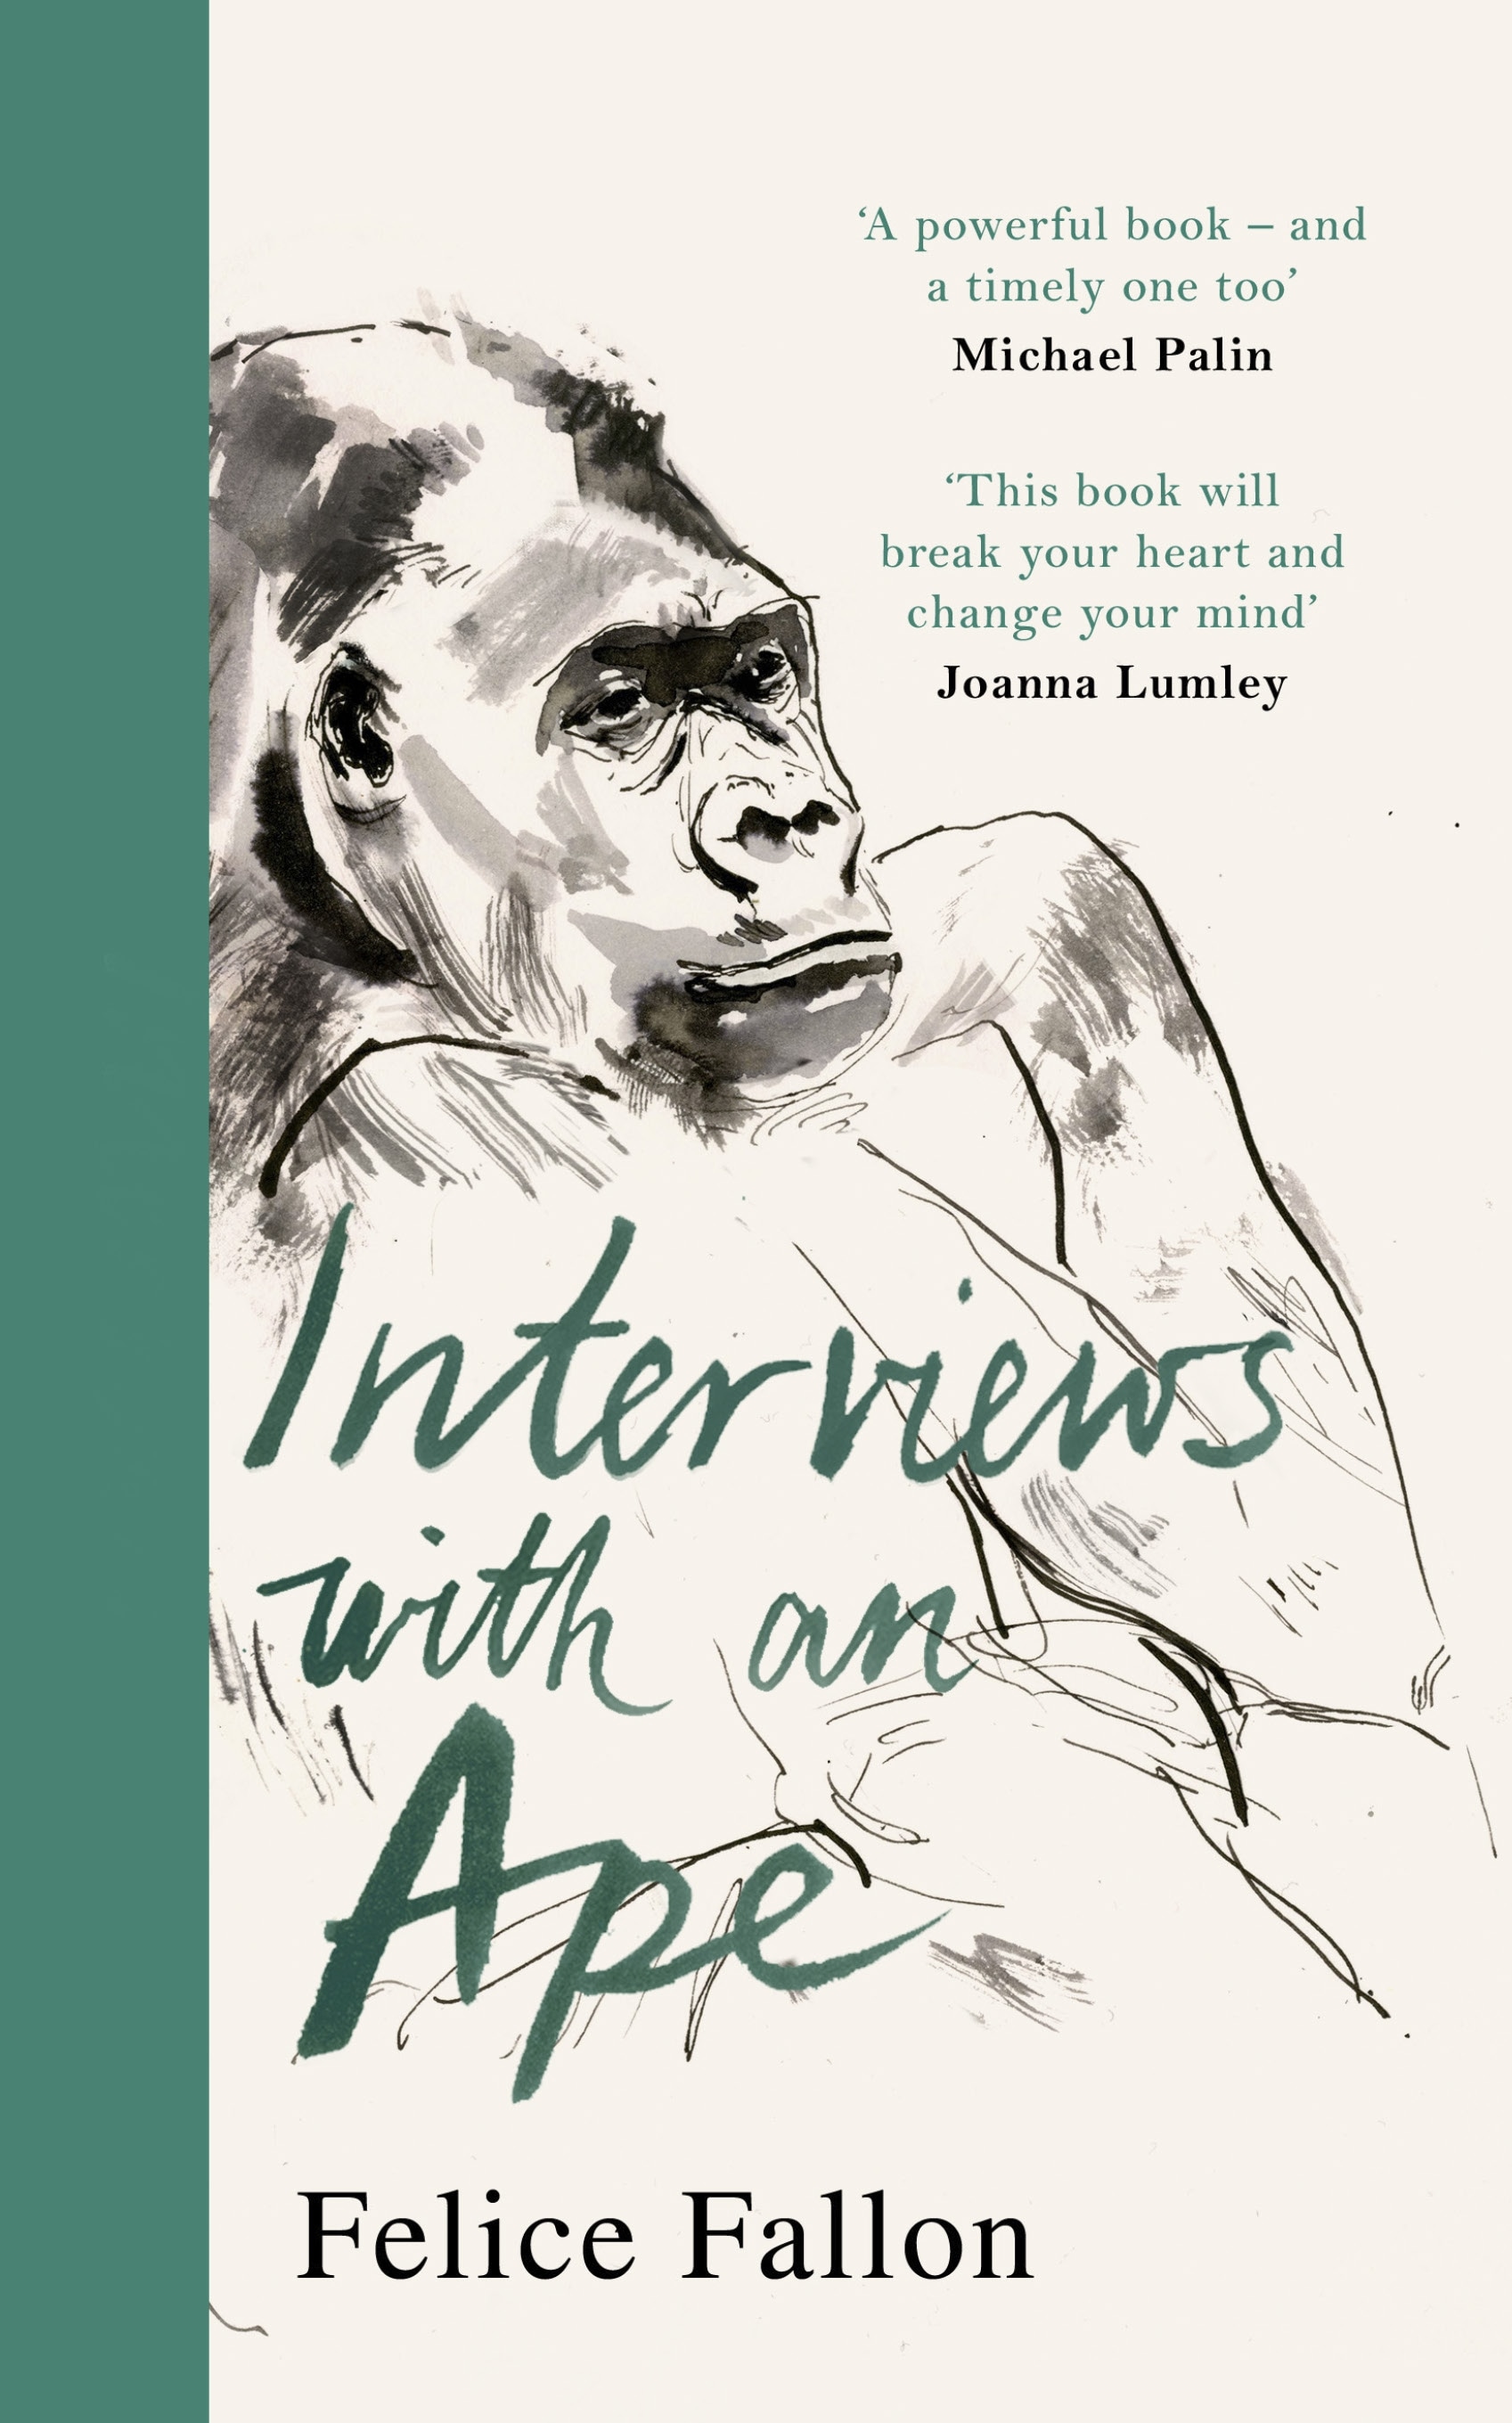 Book “Interviews with an Ape” by Felice Fallon — July 22, 2021